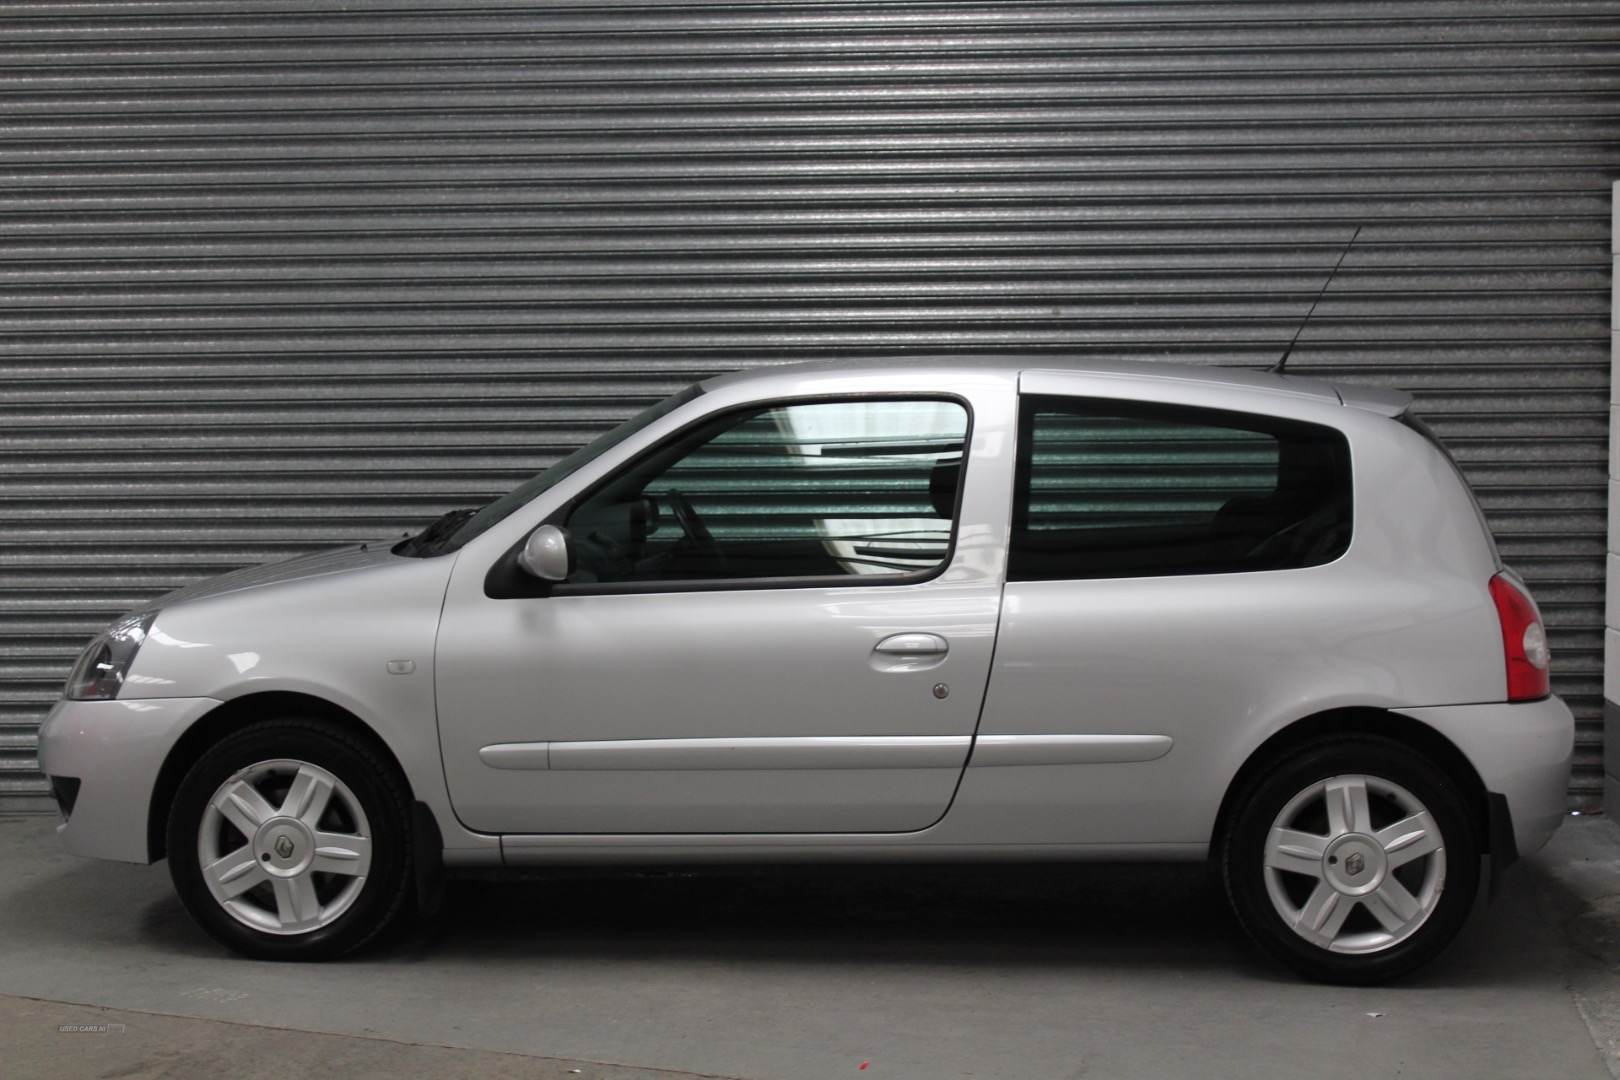 Used 2006 Renault Clio 1.2 16V Campus Sport 2007 3dr For Sale